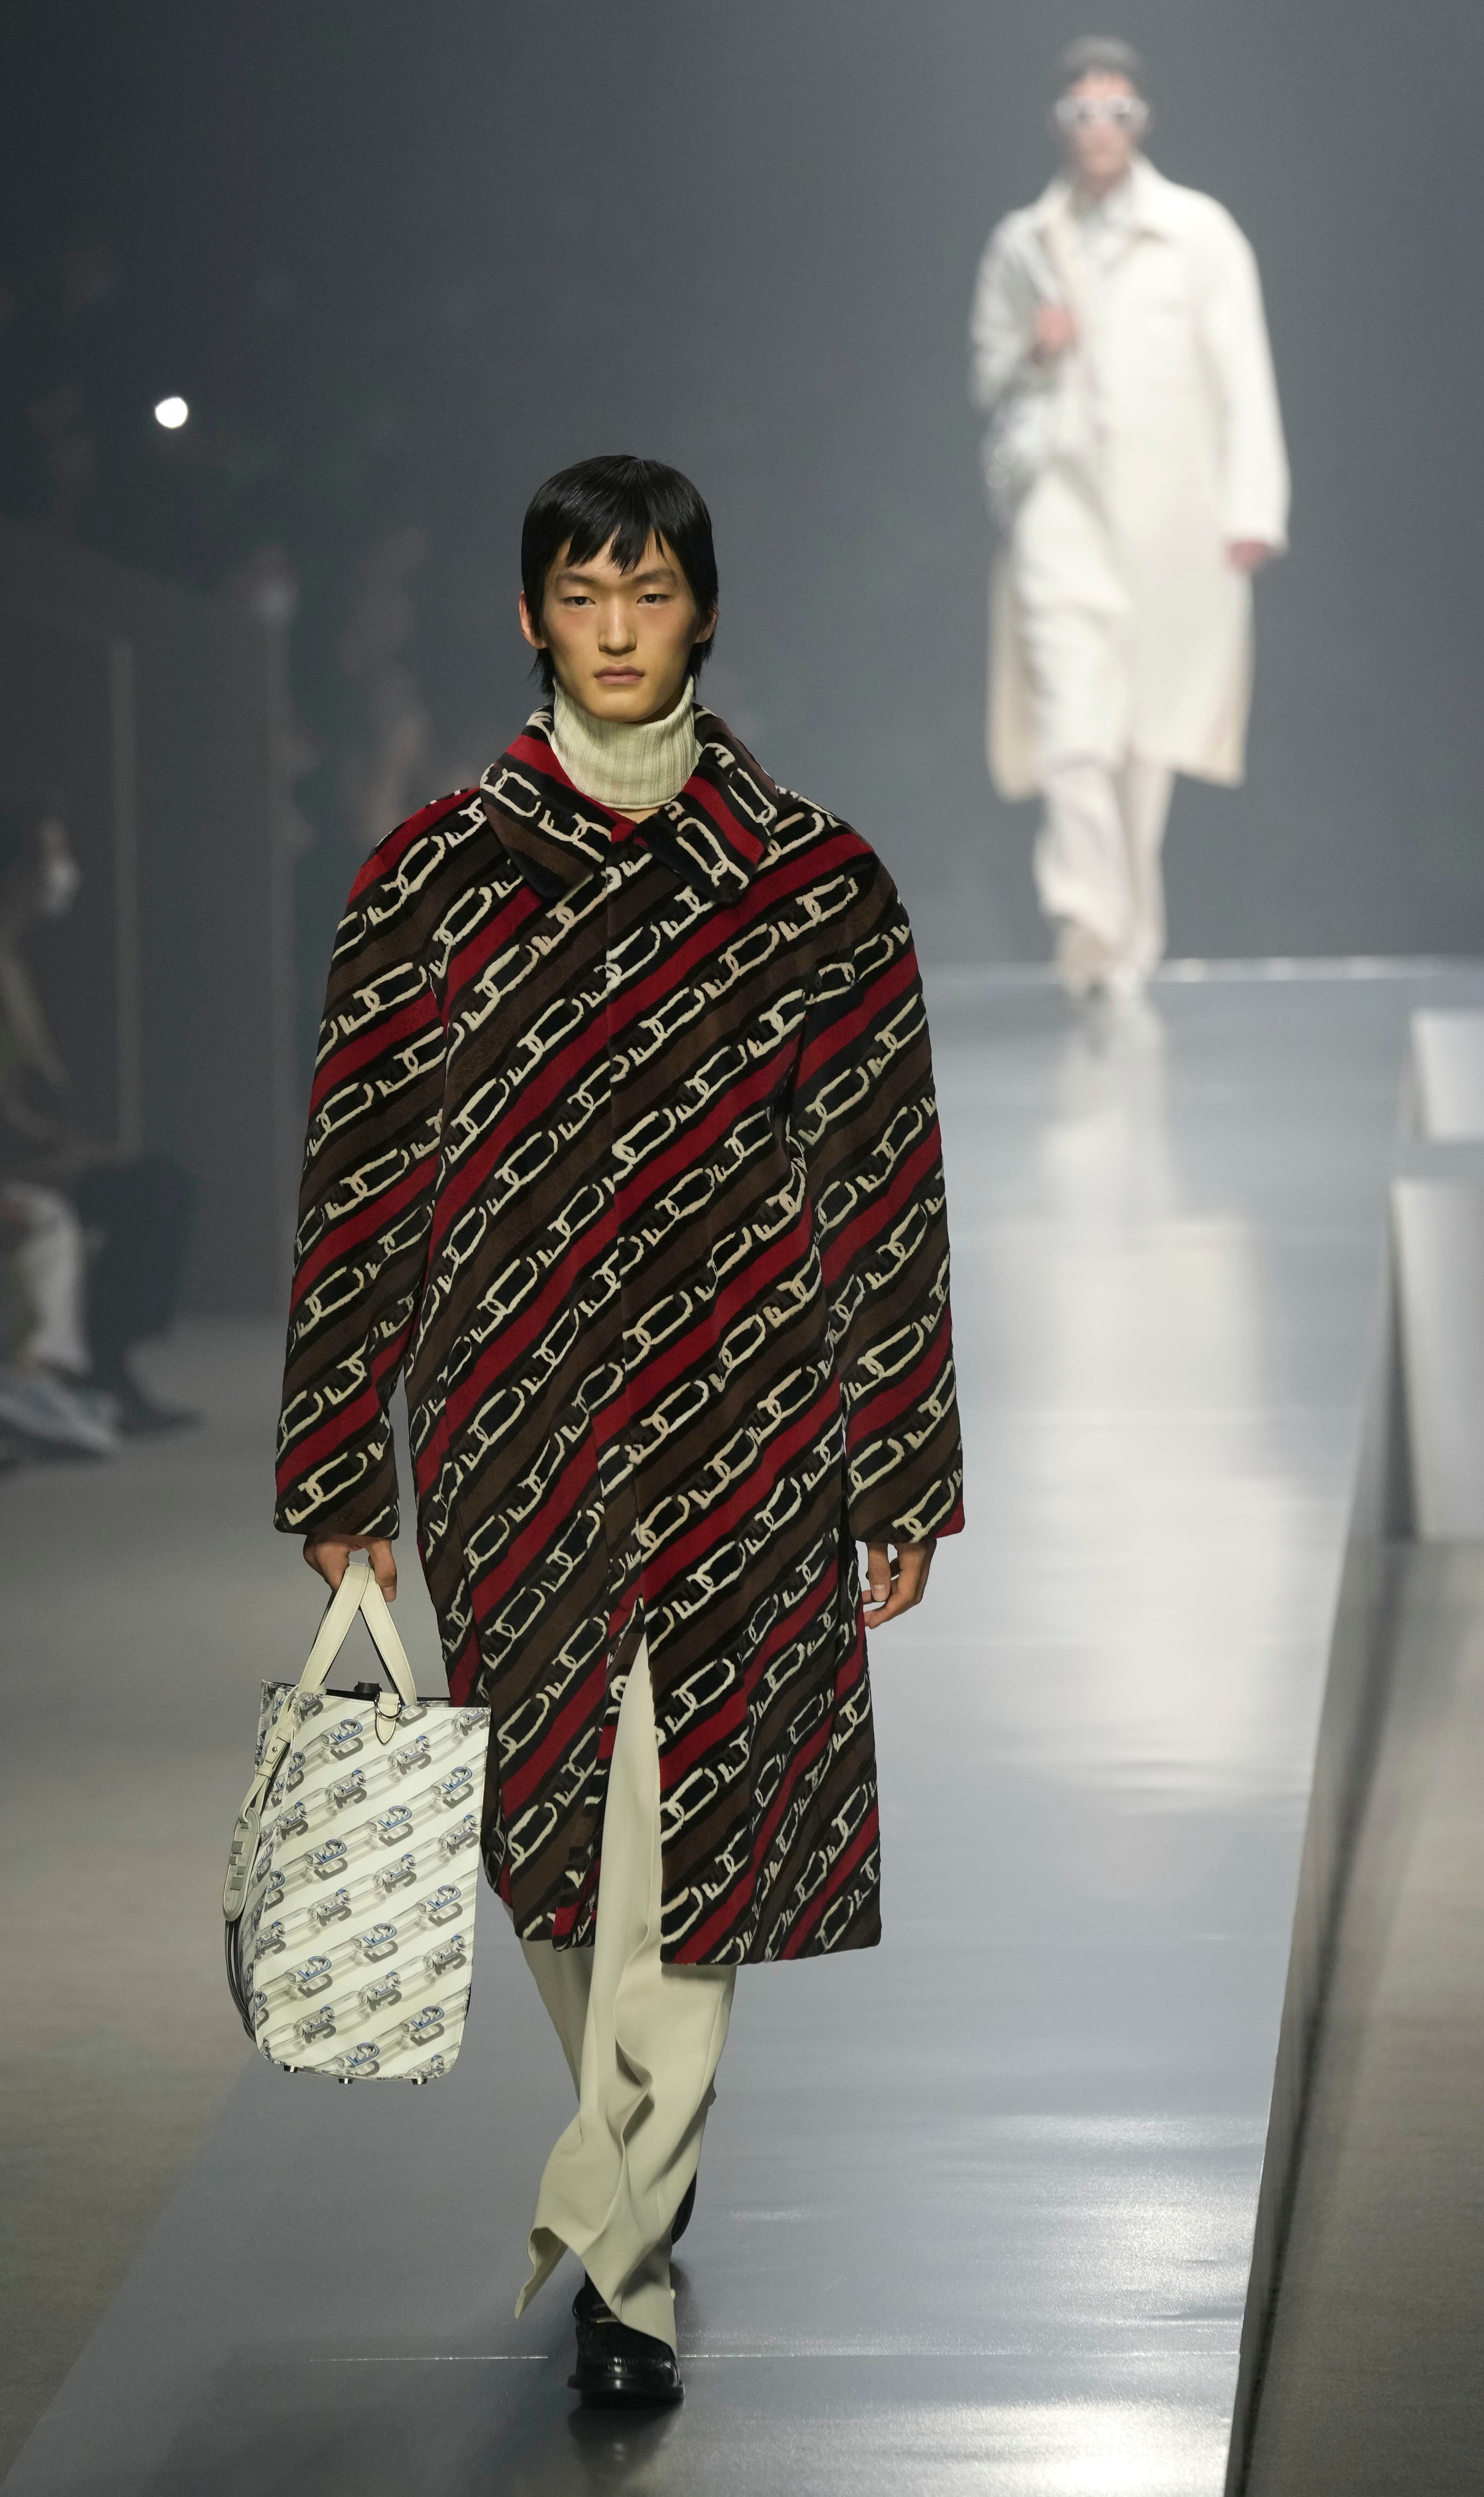 Milan Men's Fashion Week 2022: Is Fendi levelling up the gender-bending  menswear trend? The luxury fashion maison brought boundary-defying feminine  silhouettes to its autumn/winter show